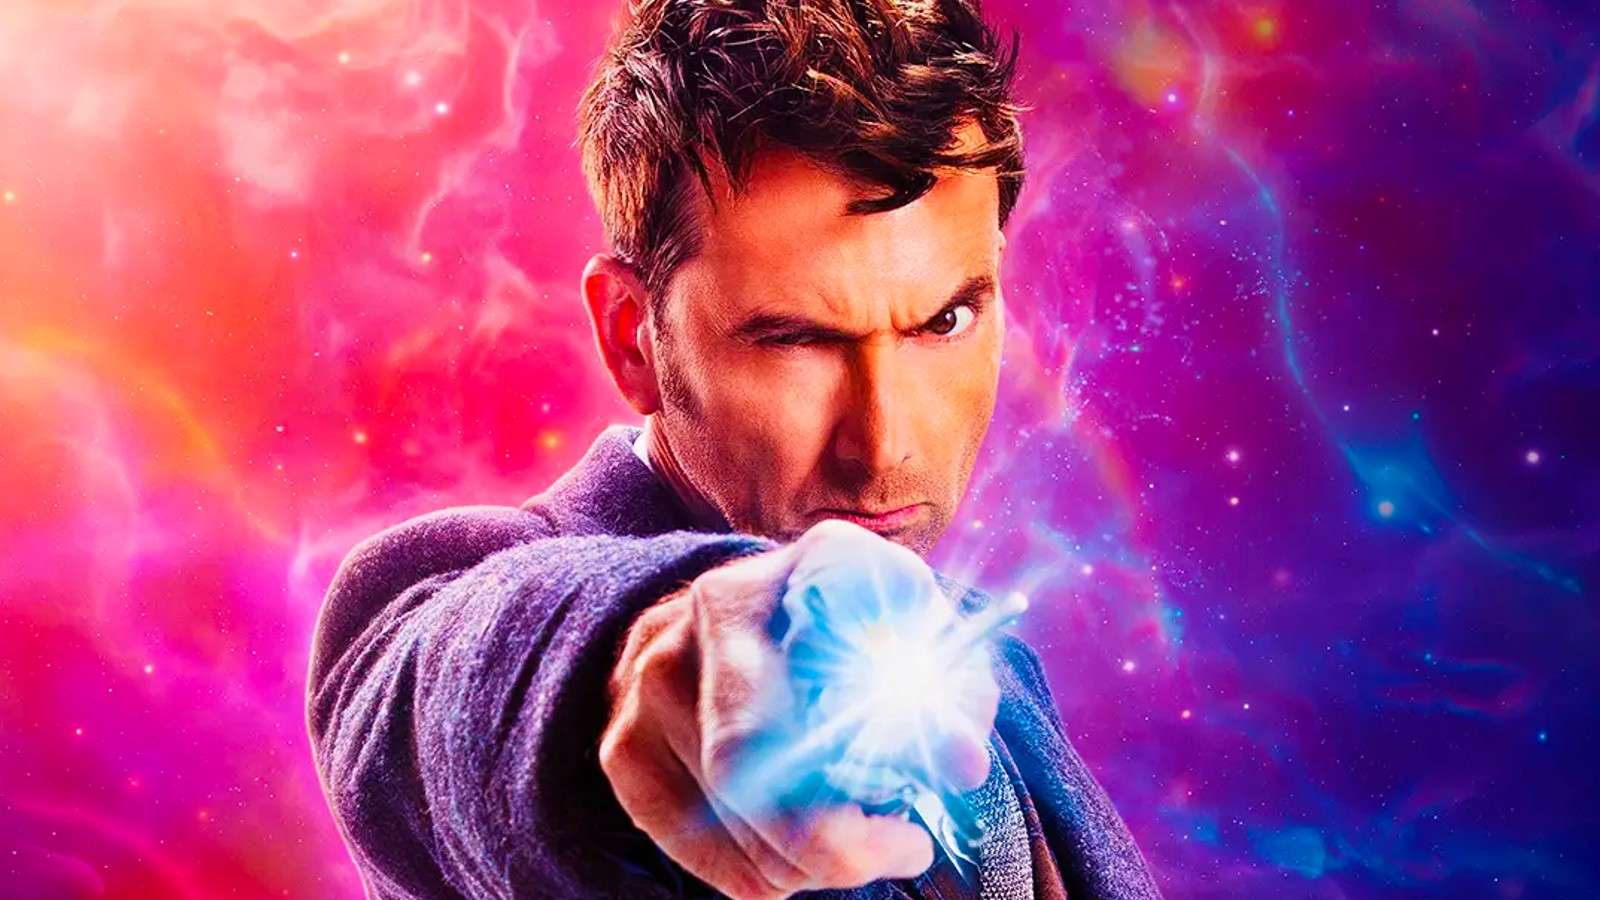 David Tennant as the Fourteenth Time Lord on the poster for the Doctor Who 60th anniversary special